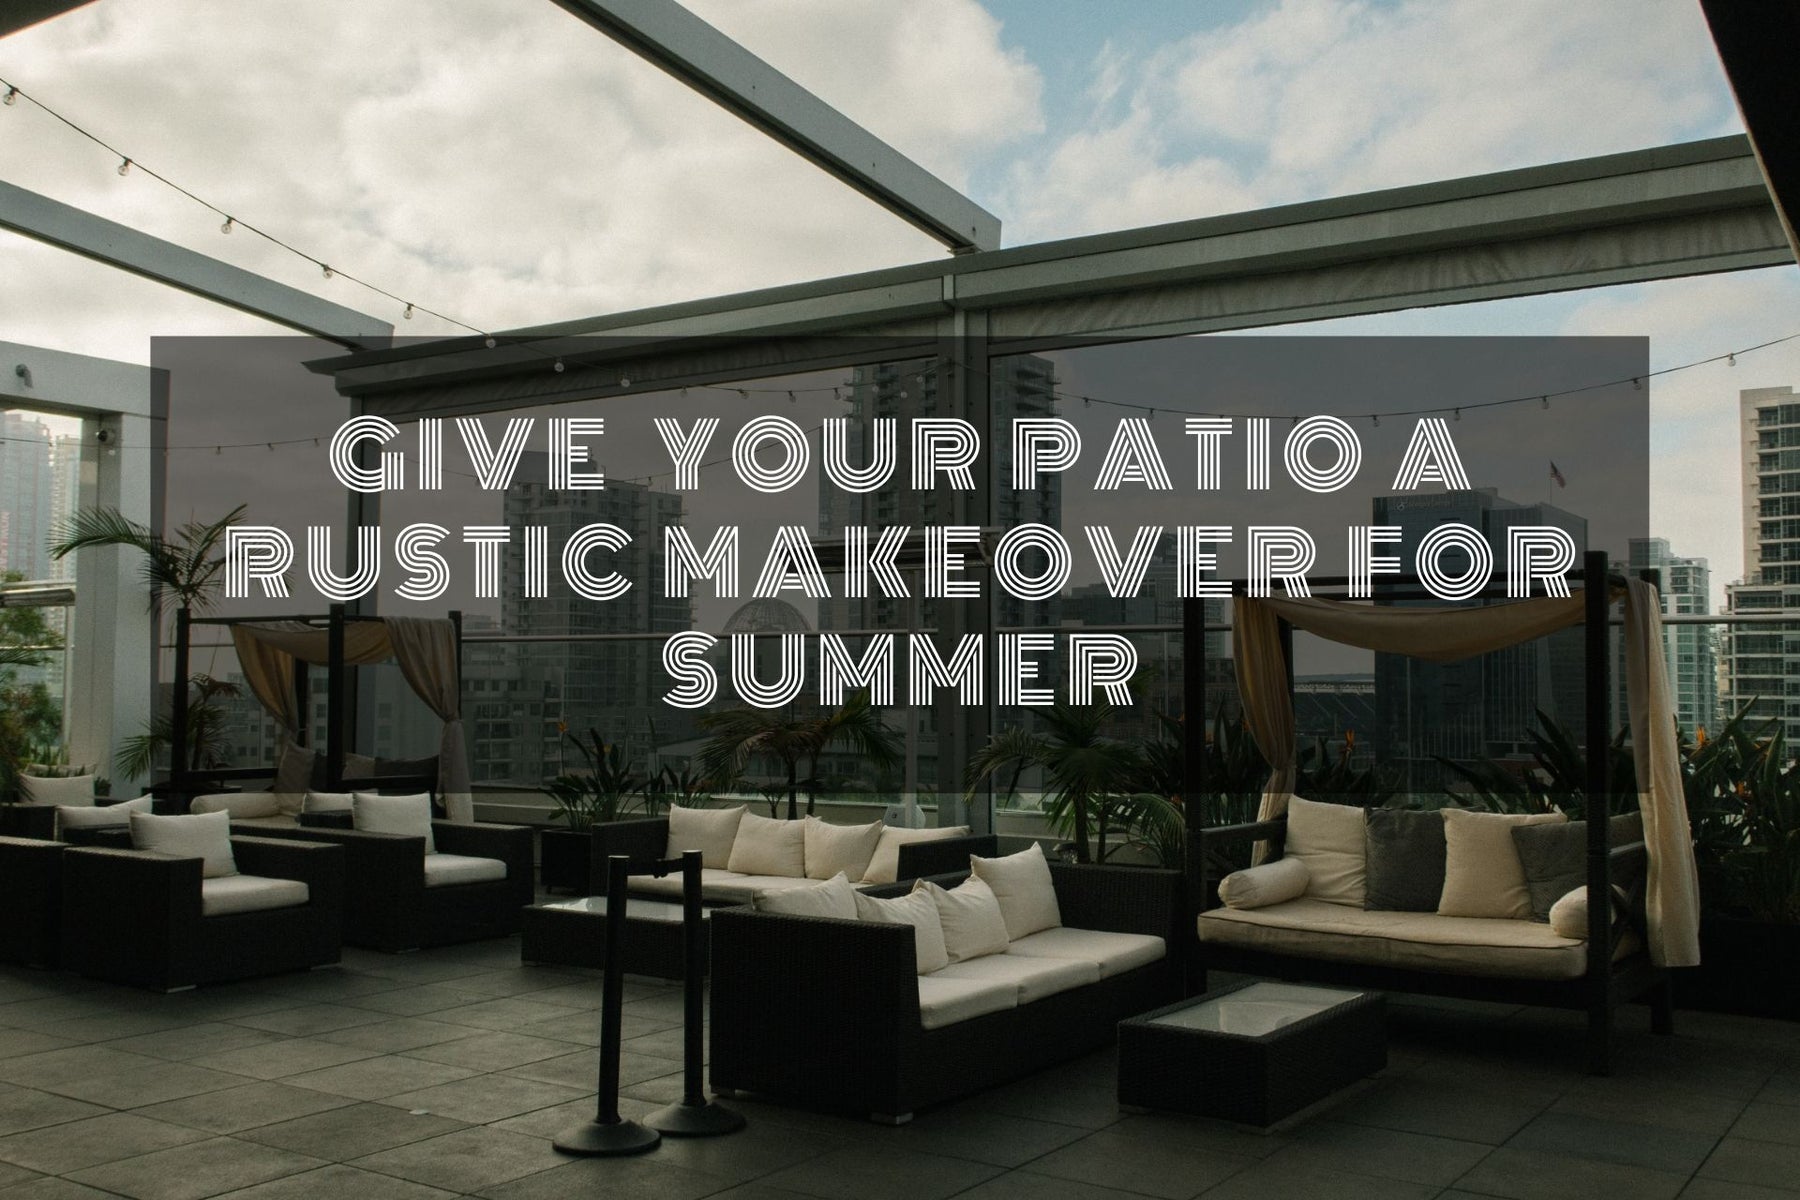 Furniture - Give Your Patio A Rustic Makeover for Summer